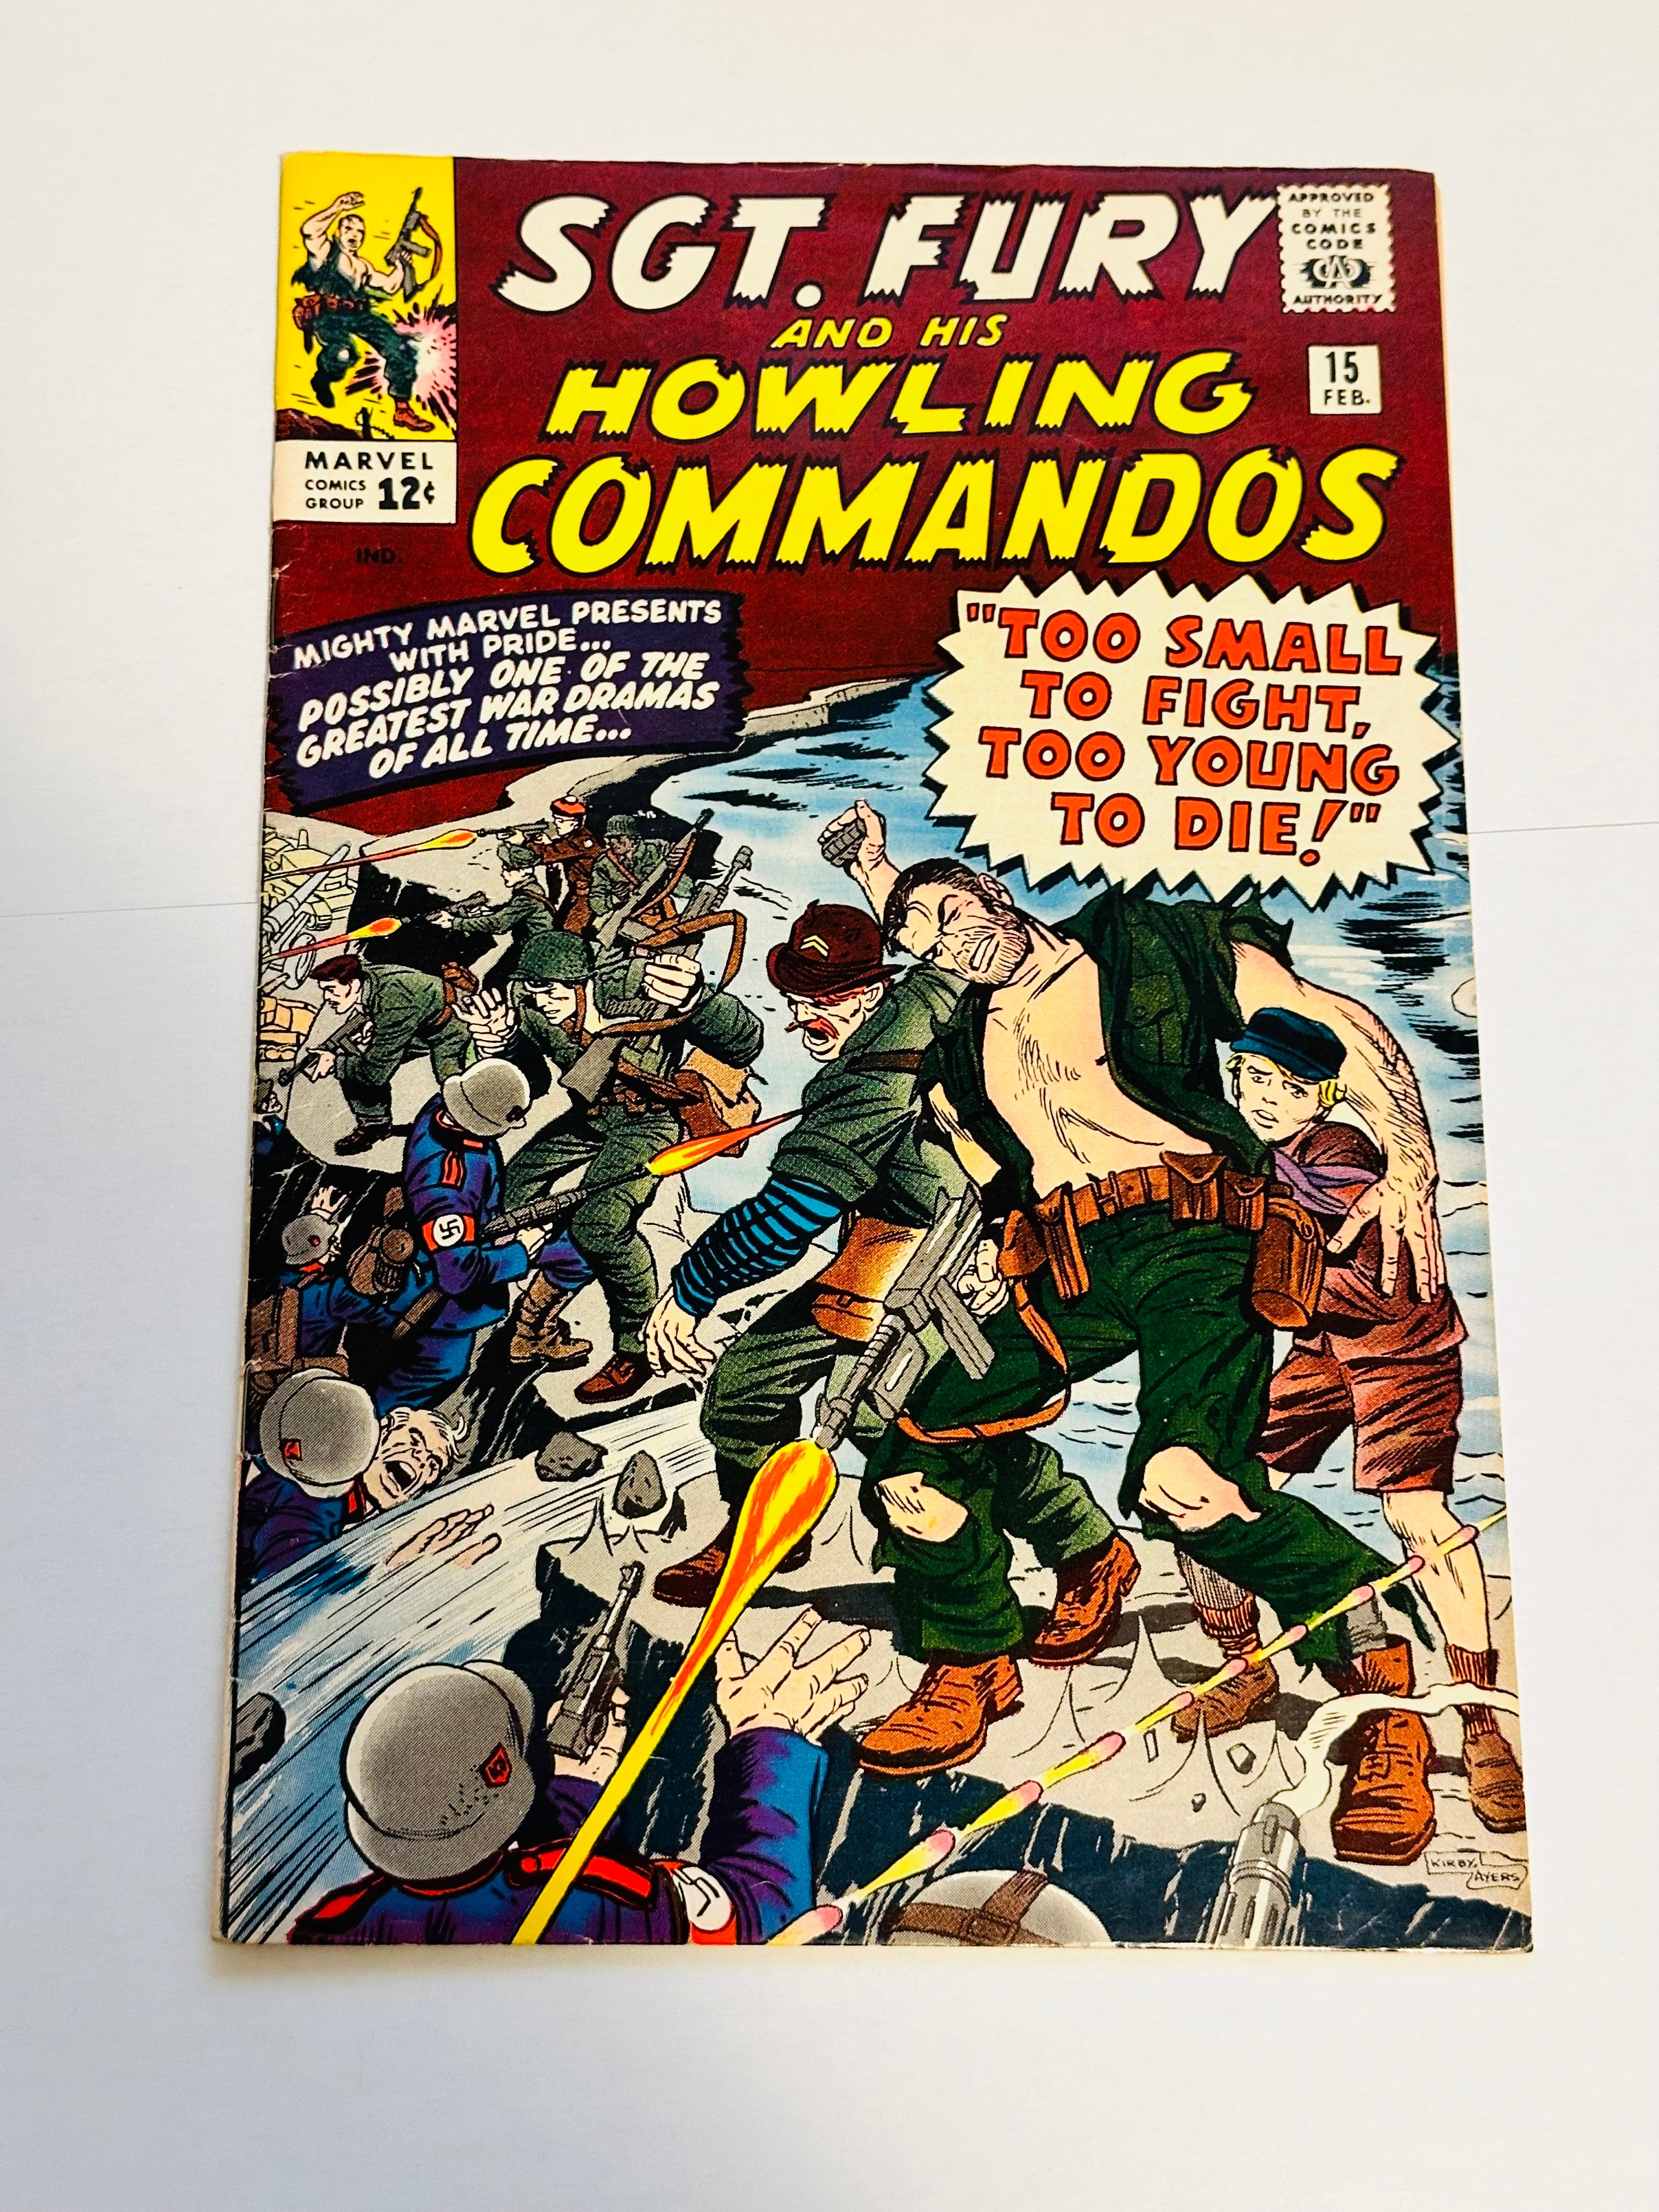 Sgt. Fury and his howling commandoes #15 high grade comic book 1965